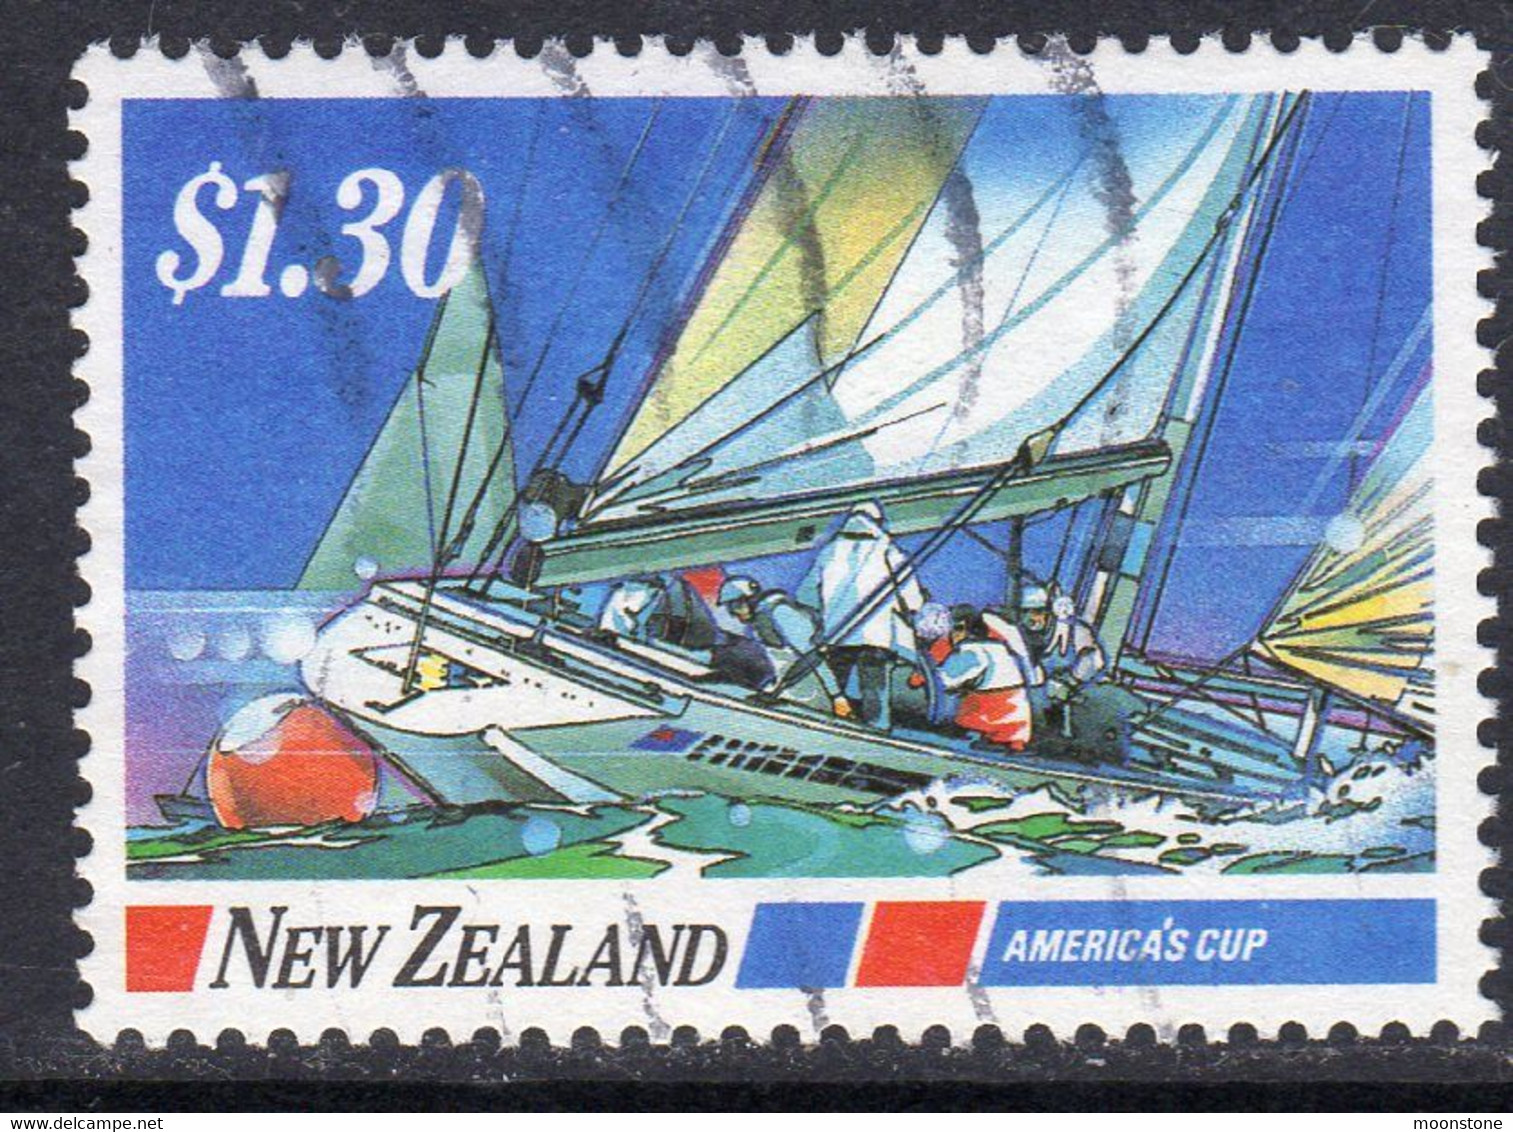 New Zealand 1987 Yachting $1.80 Value, Used, SG 1420 - Used Stamps